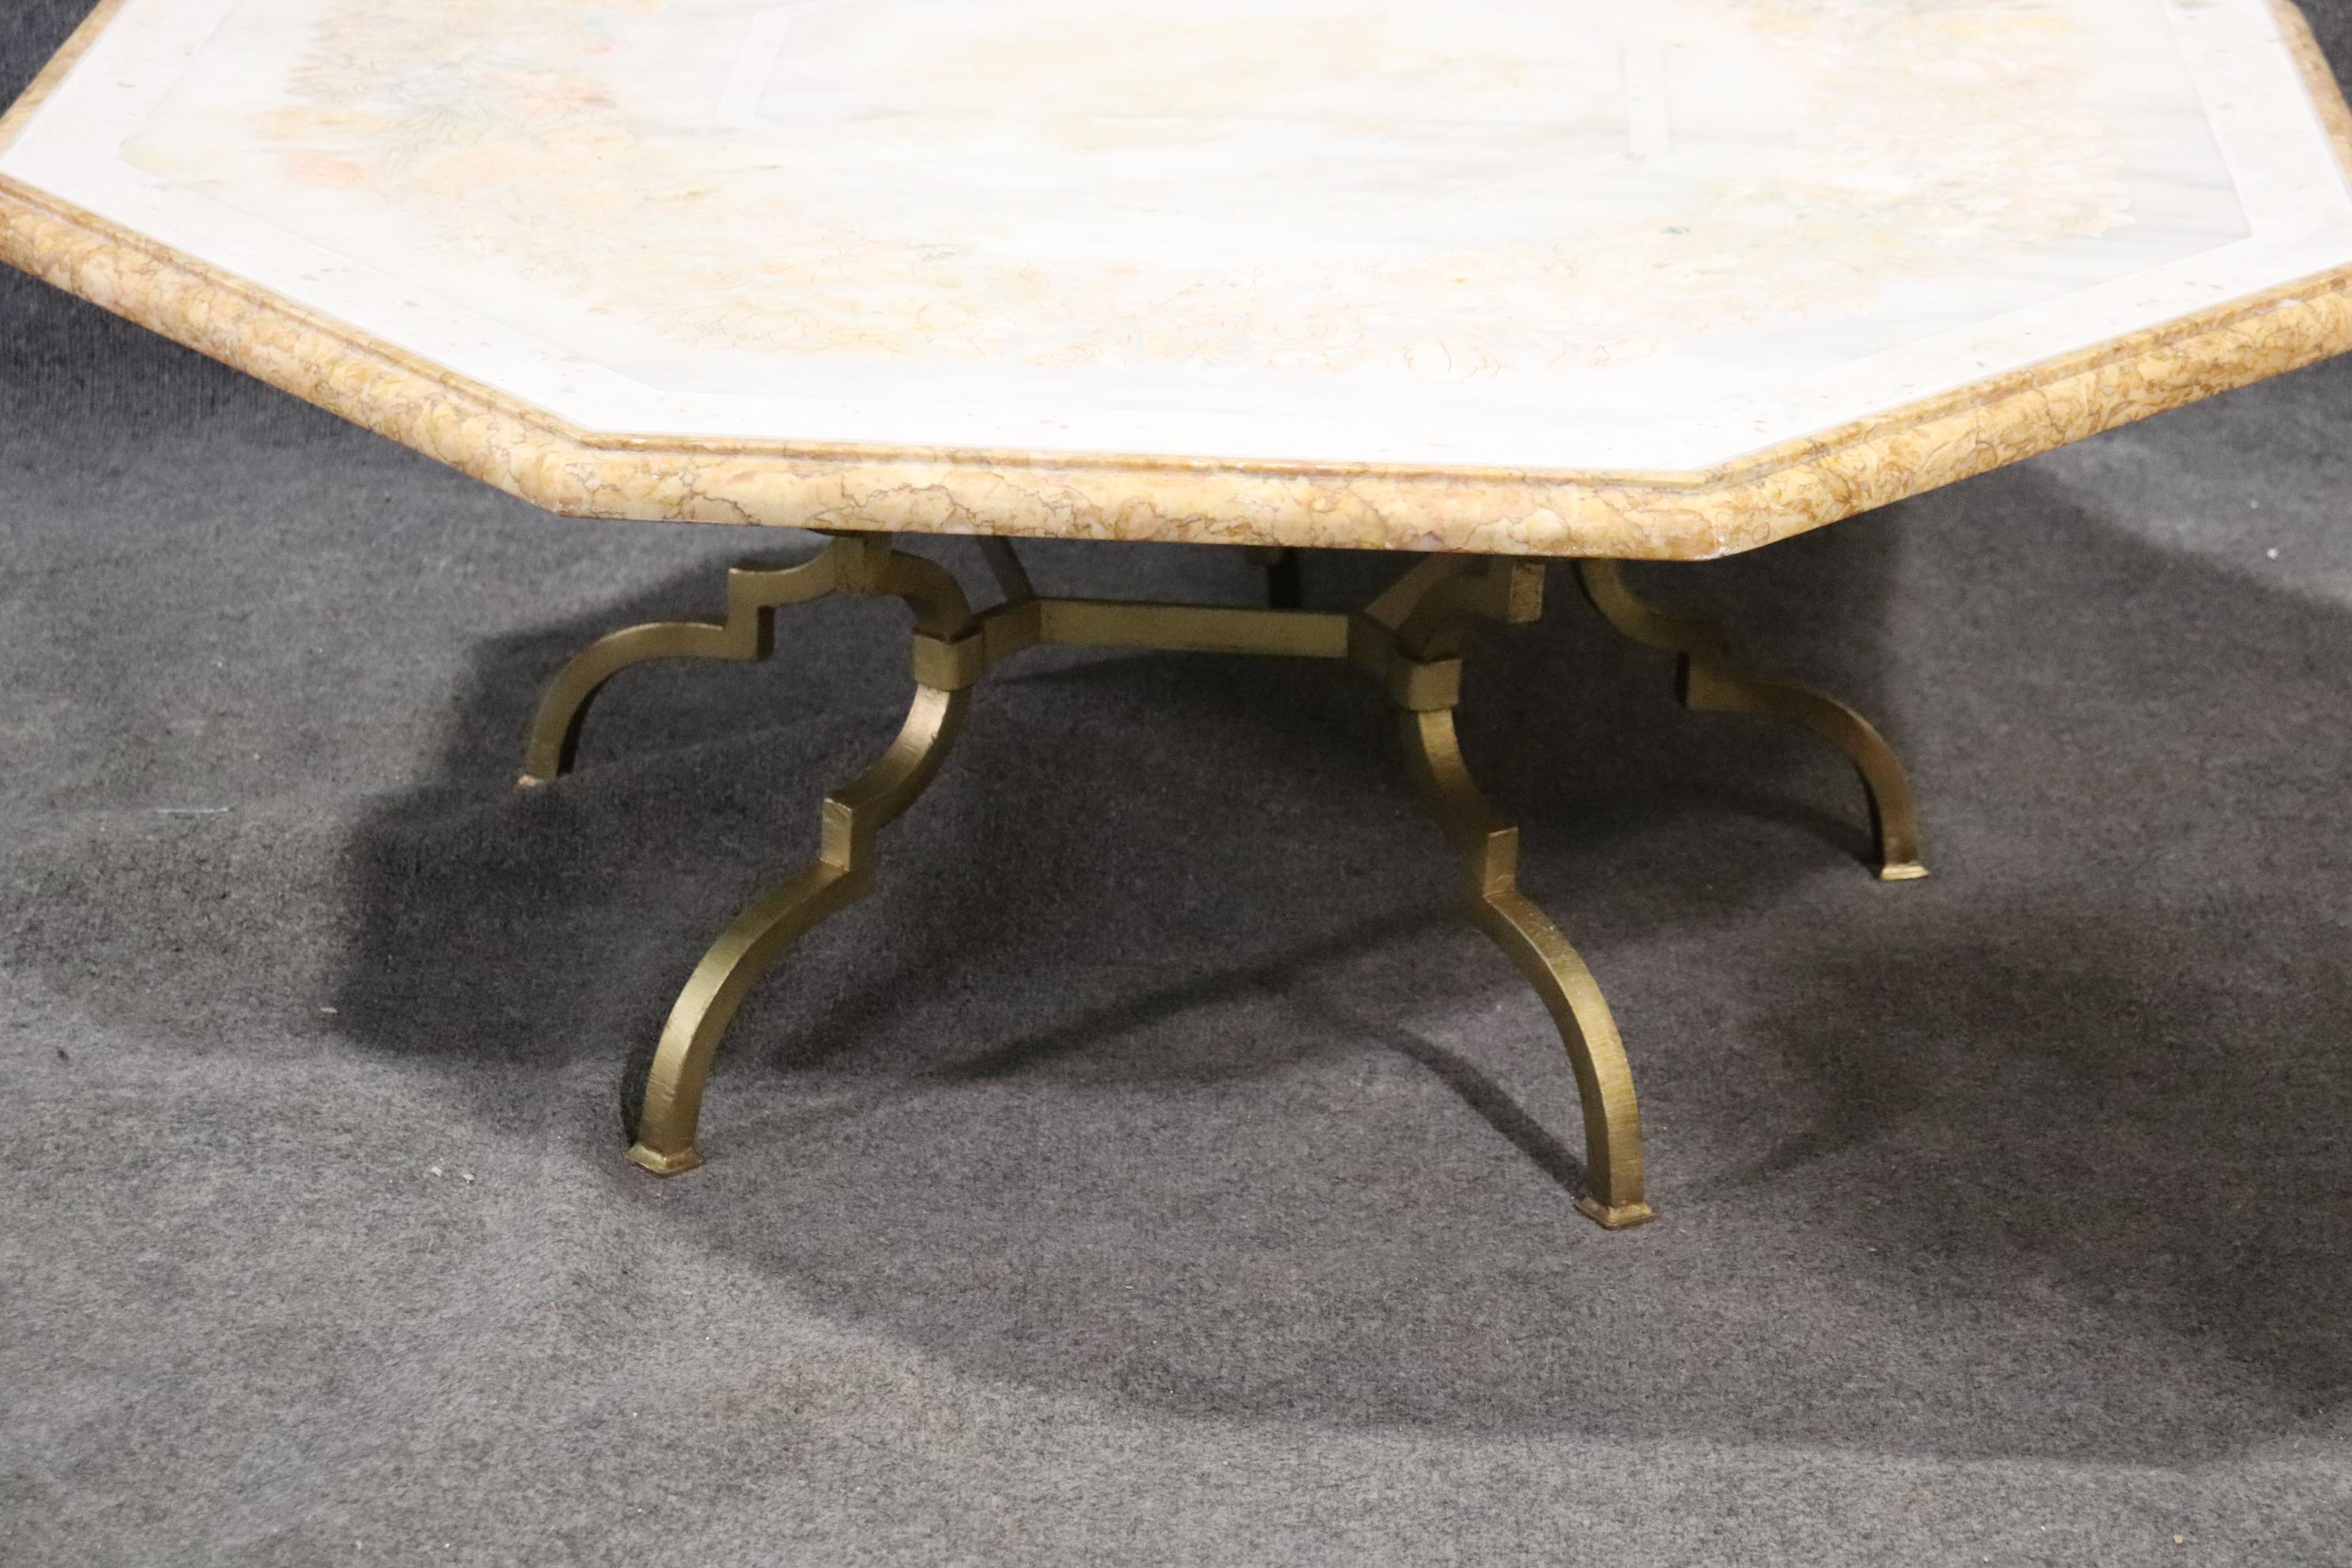 This is a superb and very uniquely designed Italian-made coffee cocktail table. The table features an inlaid marble top and a fine brass base. The table is in good vintage condition and is sure to be a unique focal point in your home. The table